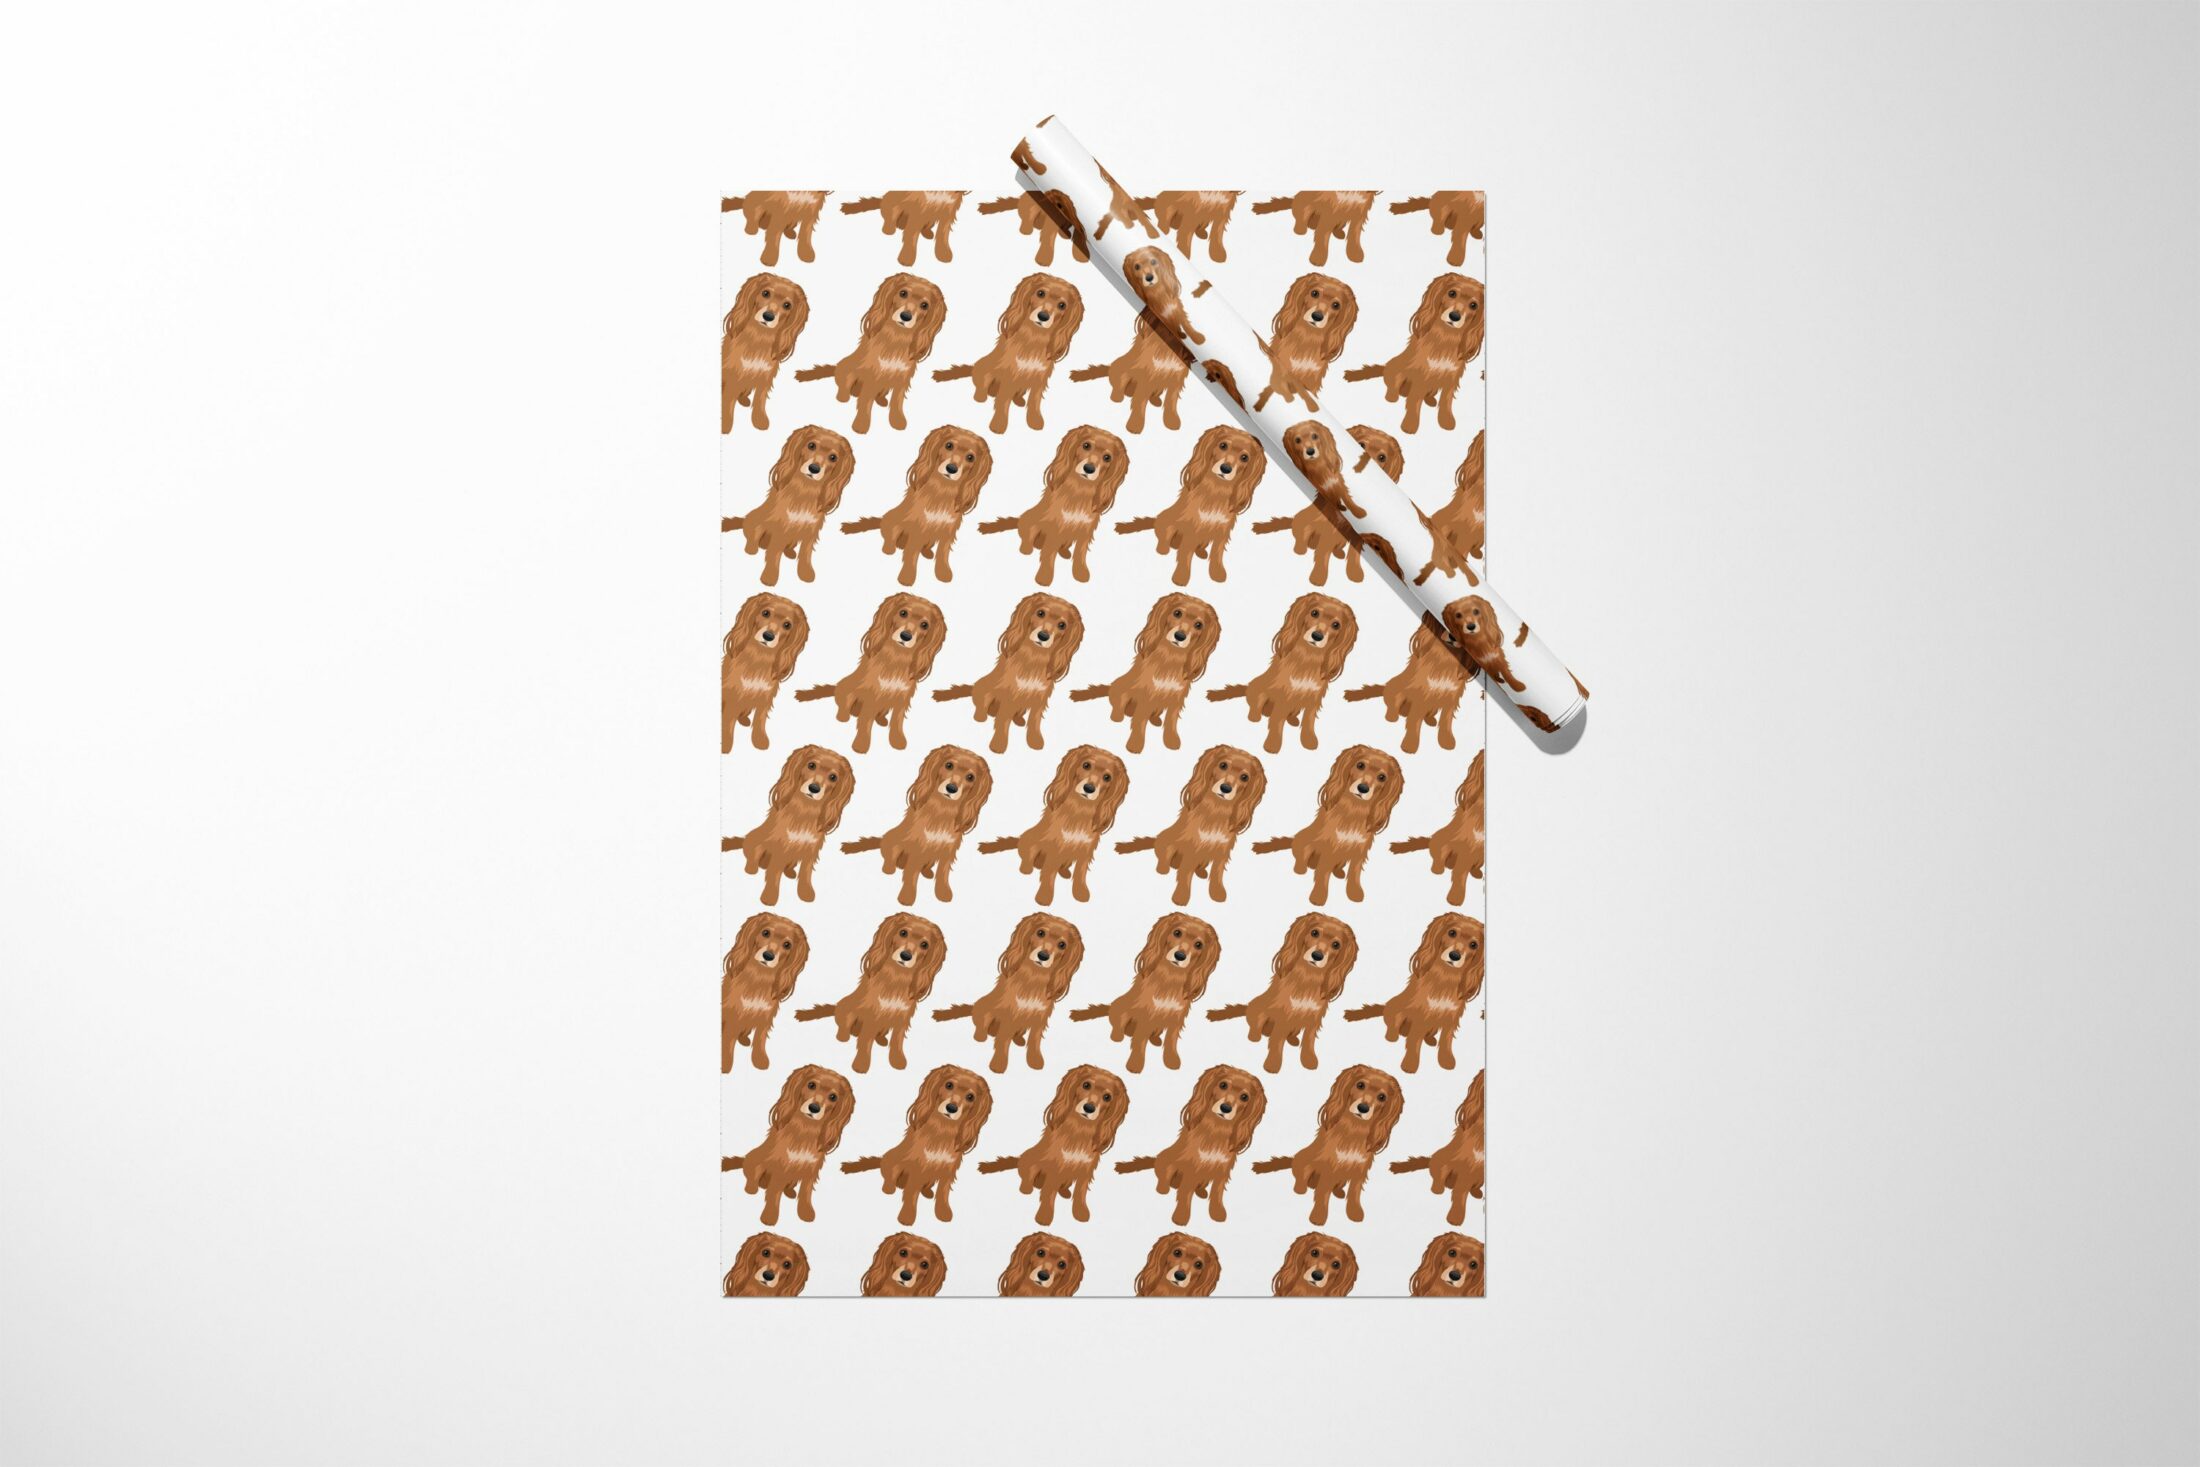 A brown wrapping paper with Cavalier King Charles Spaniels on it - Cavalier King Charles Spaniel Gift Wrap || Wrapping Paper Unique Gift Idea For Her Dog Print Wedding Gift Reusable Gift Wrap 03-016-541